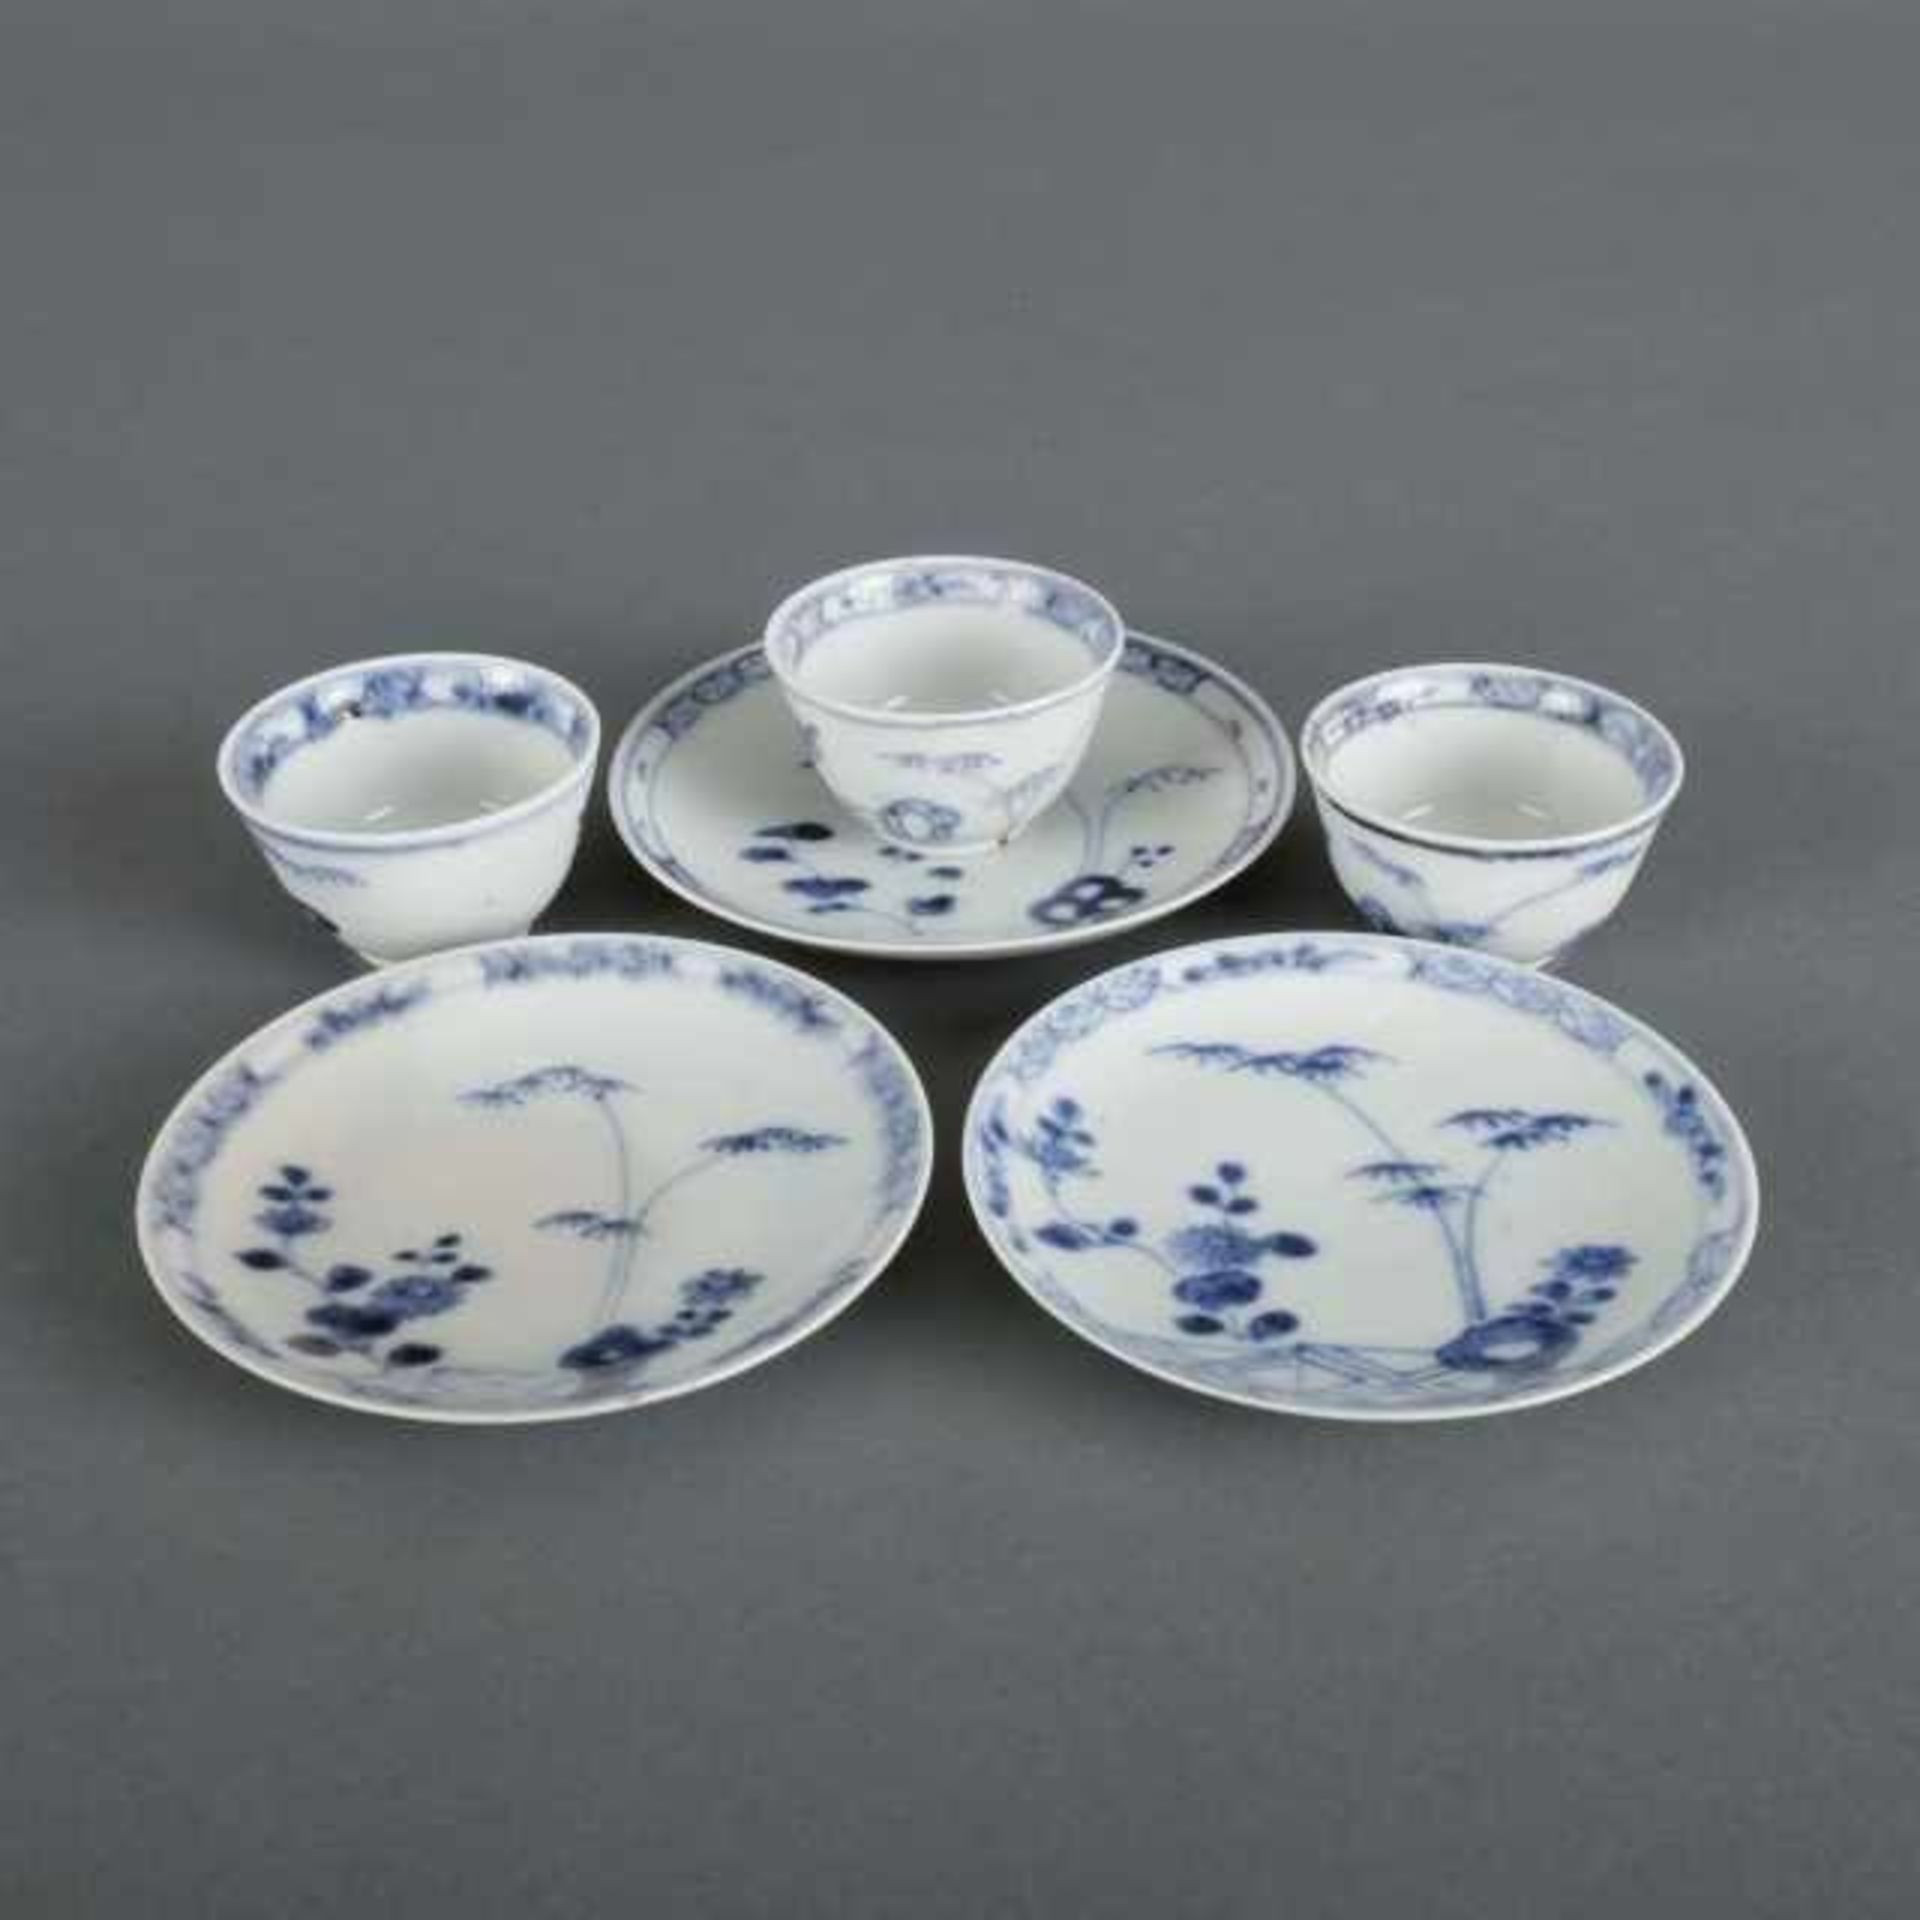 Three miniature blue and white porcelain cups and saucers decorated with a garden motif, after a